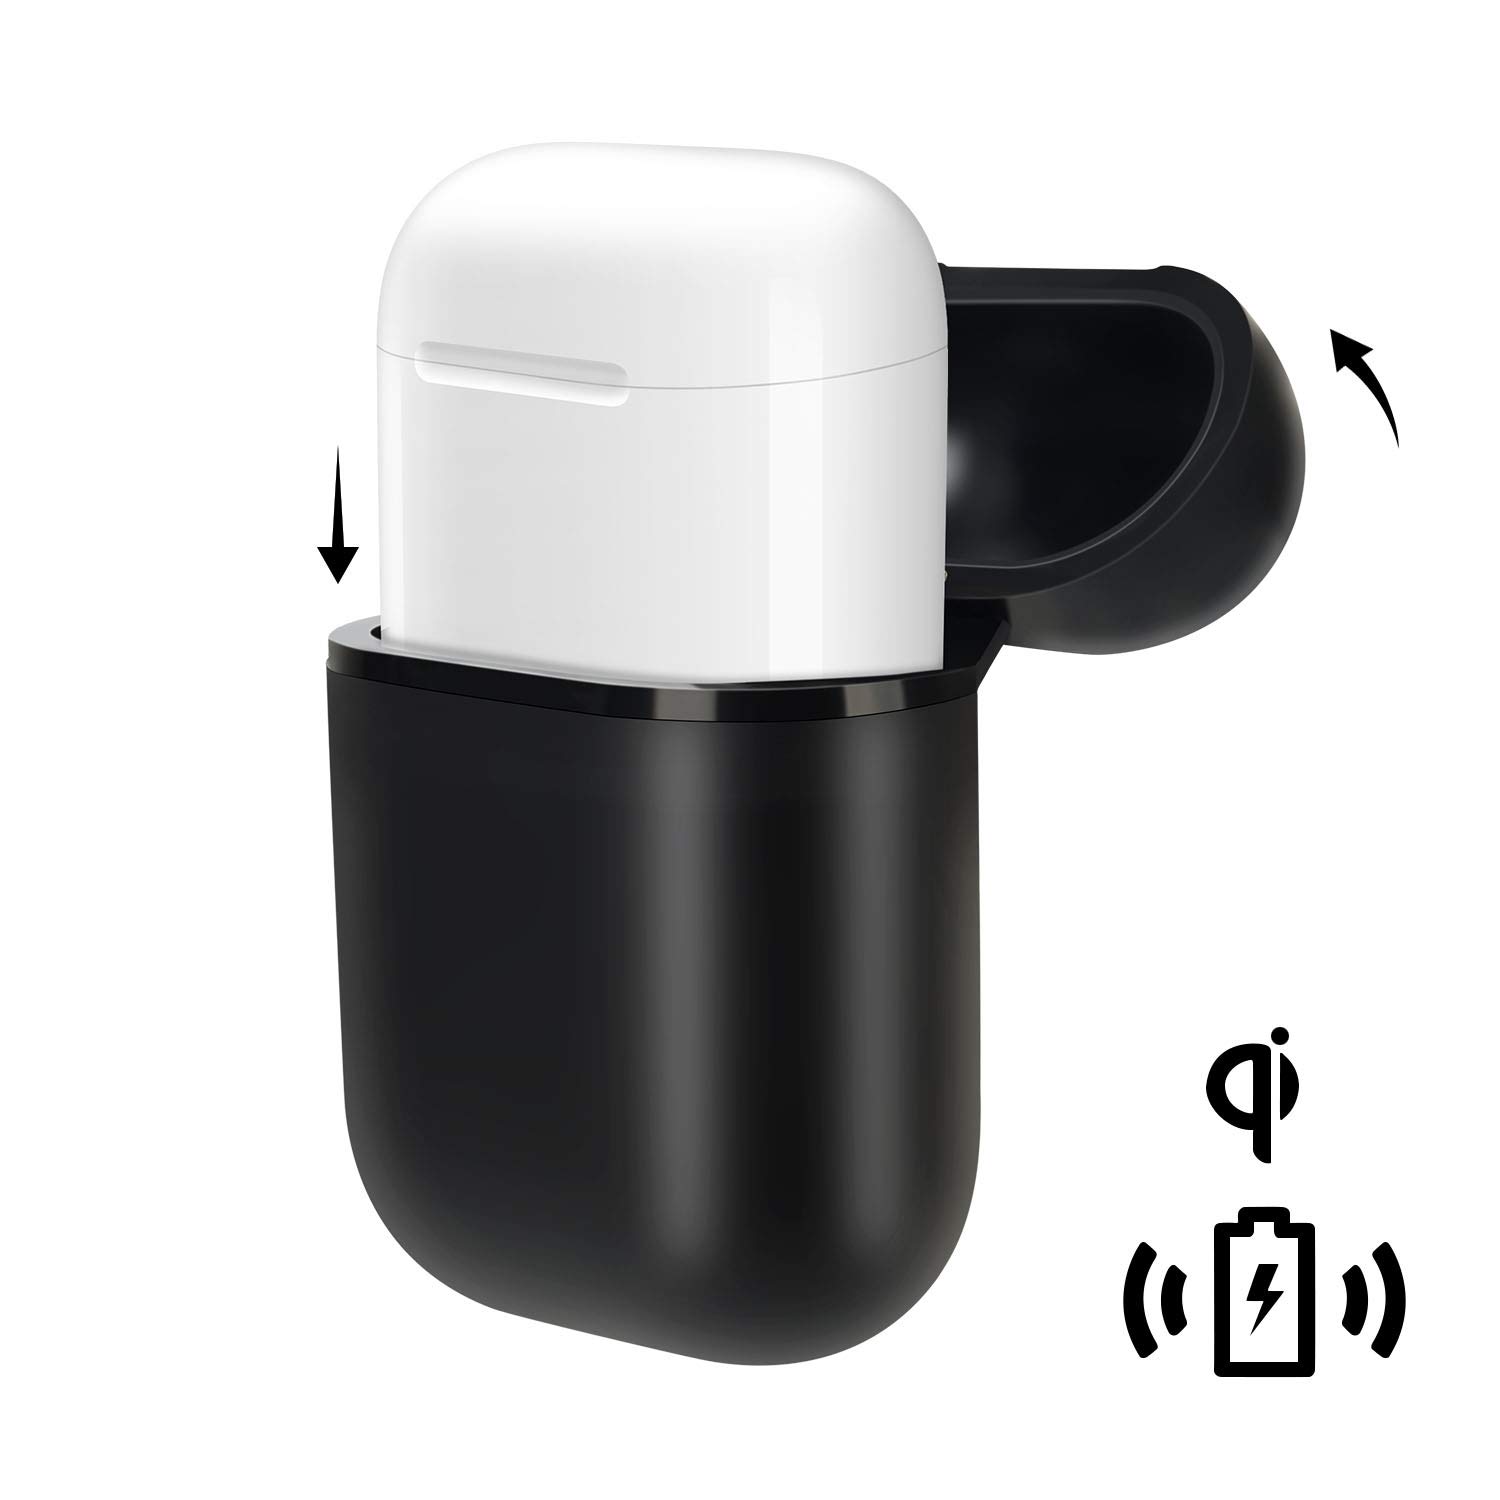 AirPods Wireless Charging Cover Case Hard Silicone Protective Skin for Airpods (Black)